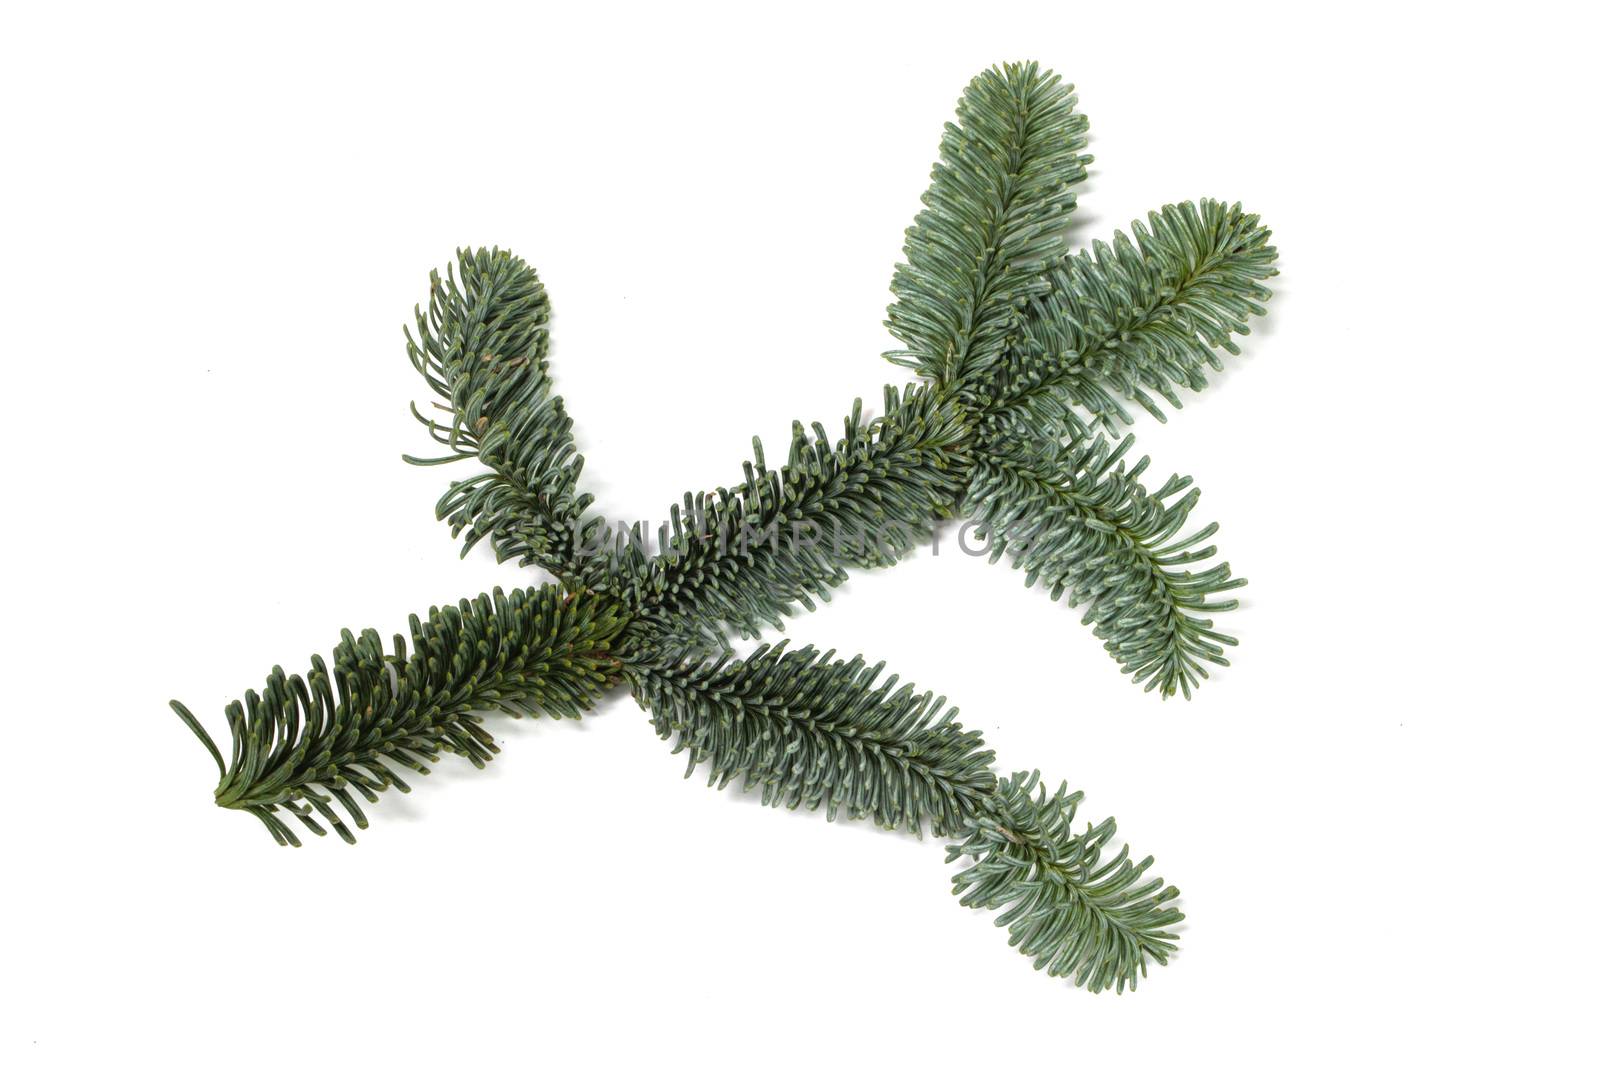 Evergreen christmas noble fir pine tree branch on white background